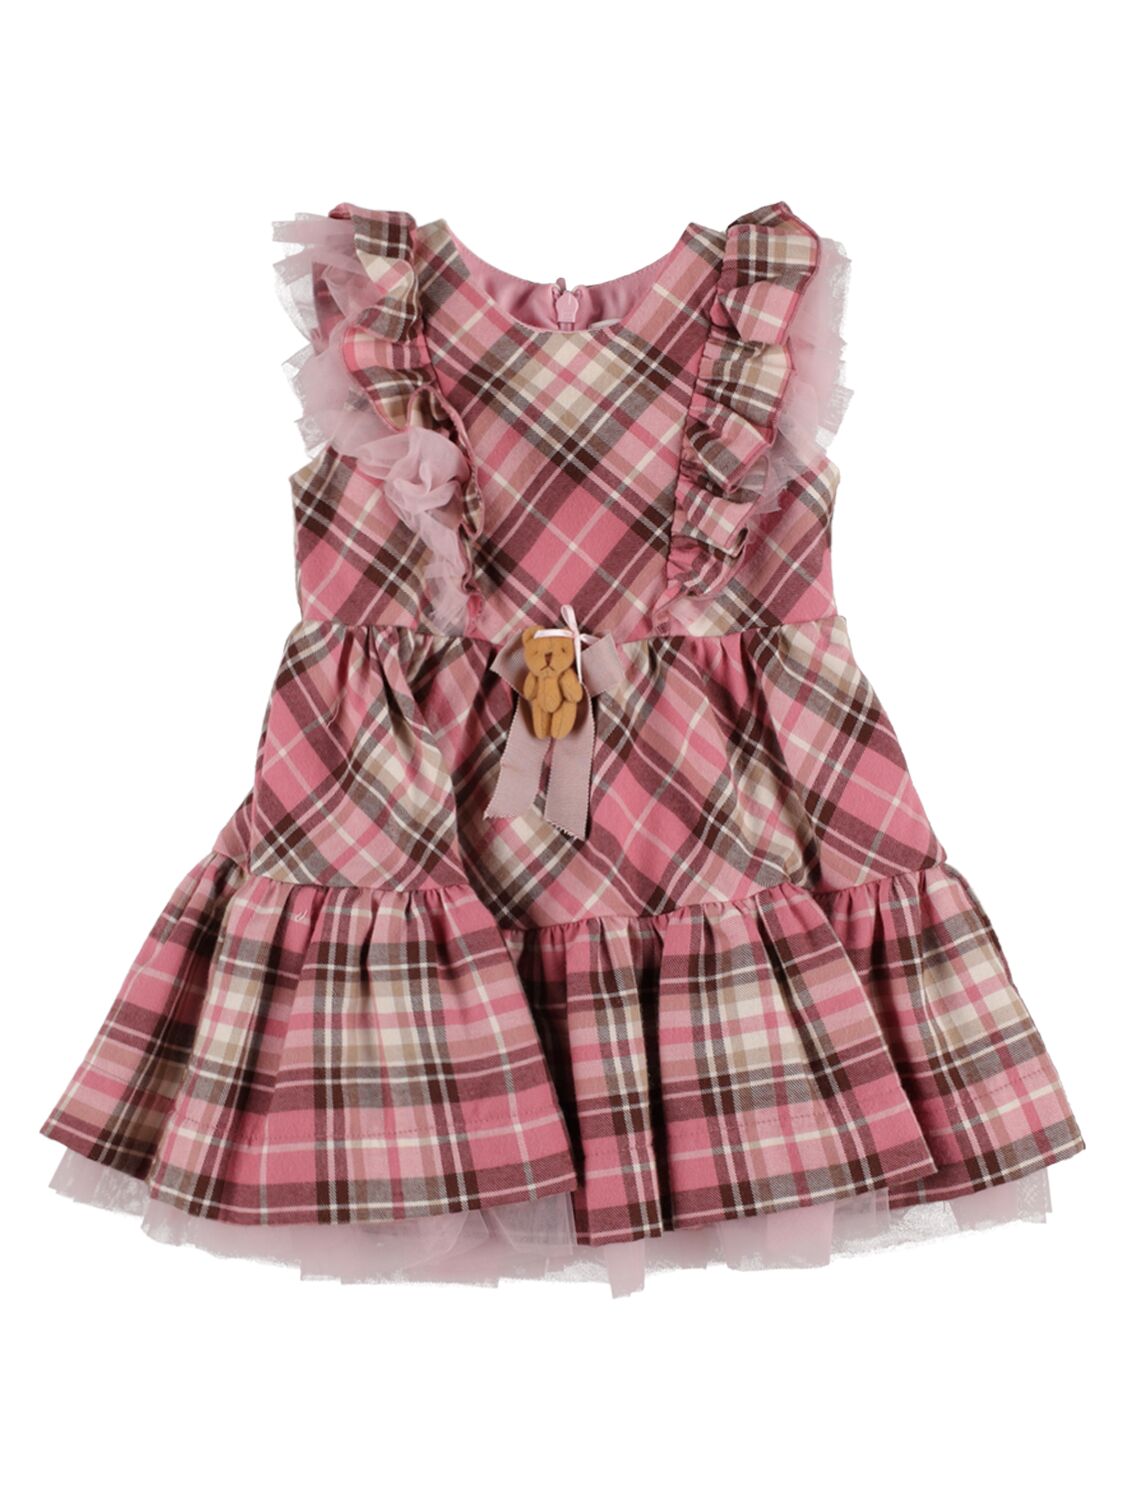 Image of Check Print Light Flannel Party Dress